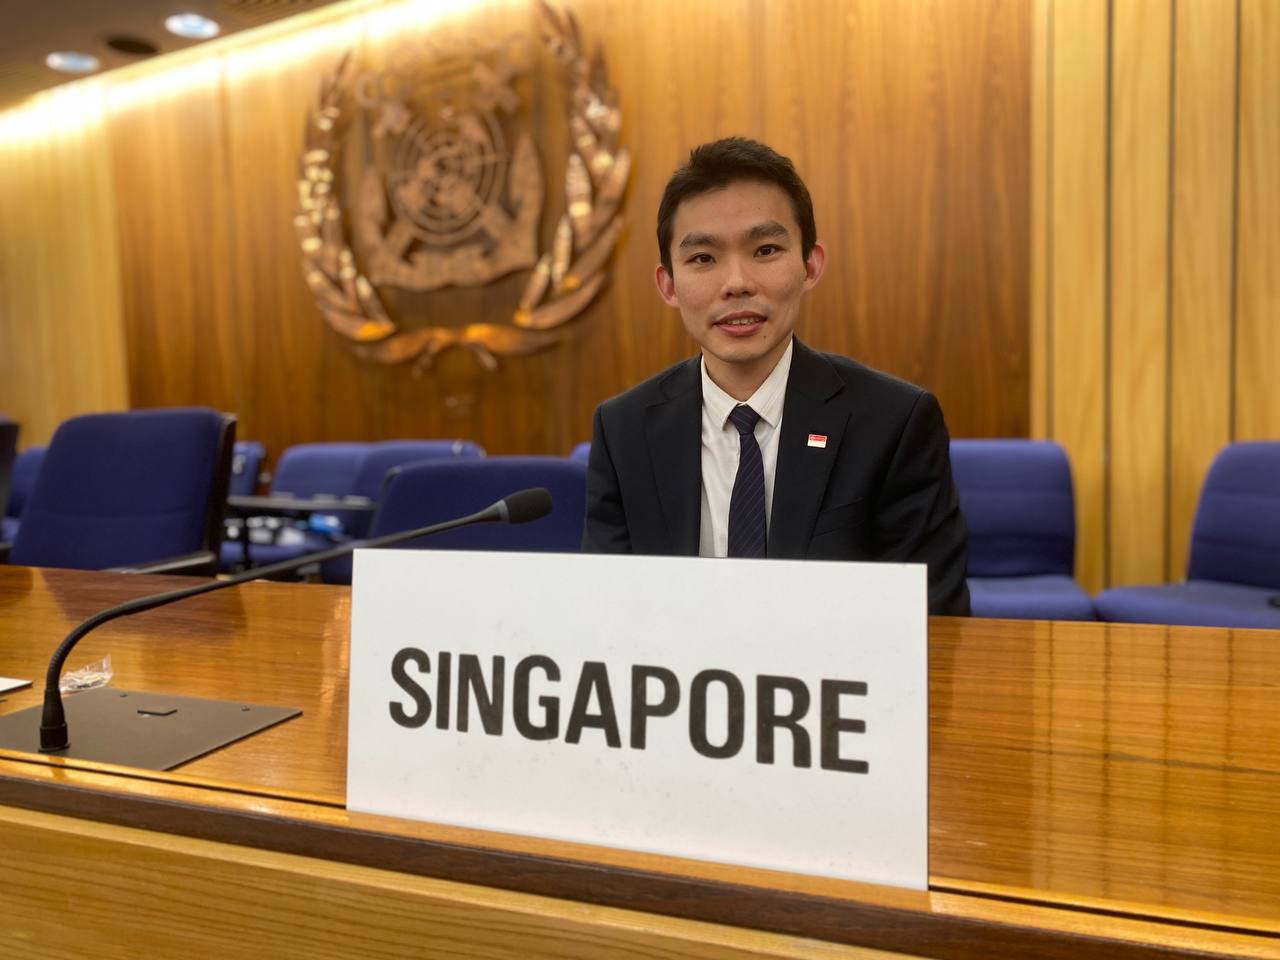 Mr Tan Hanqiang, First Secretary (Maritime), High Commission of the Republic of Singapore to the United Kingdom (UK), has been appointed by the IMO as Vice-Chair of the IMO Marine Environment Protection Committee